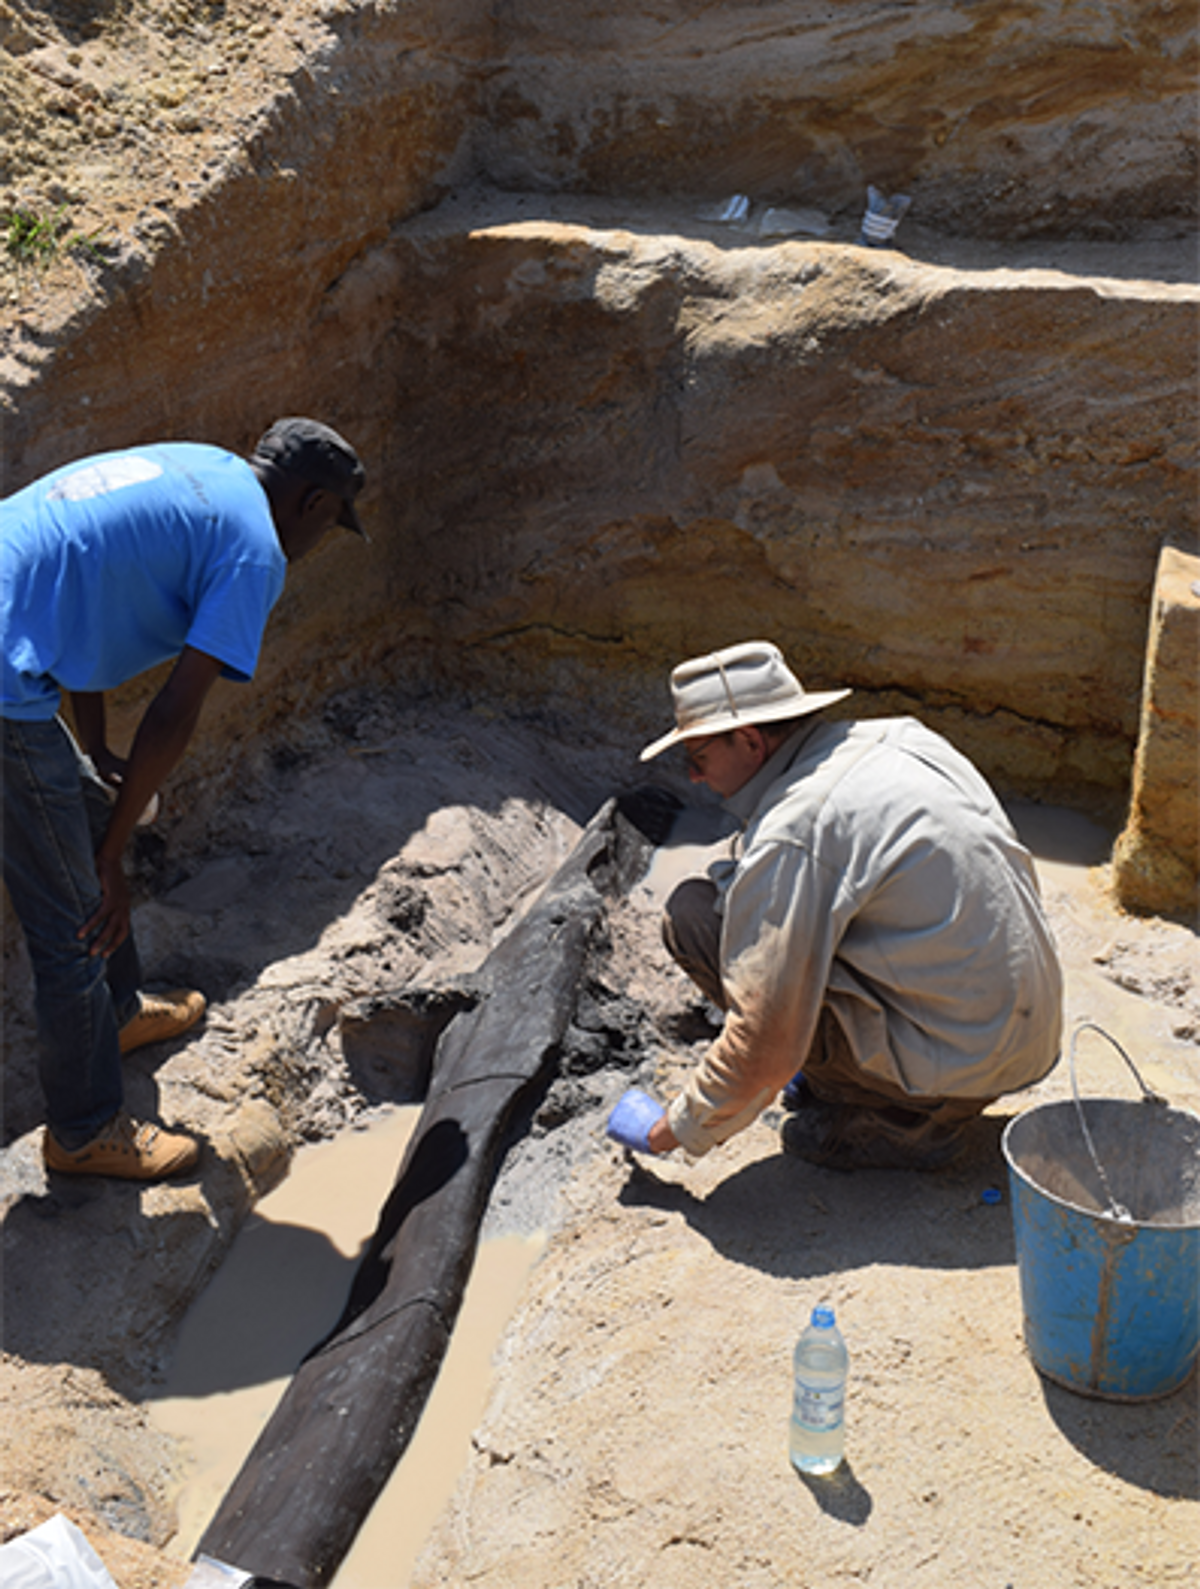 Archaeologists began excavating the central African site in 2019

Courtesy University of Liverpool